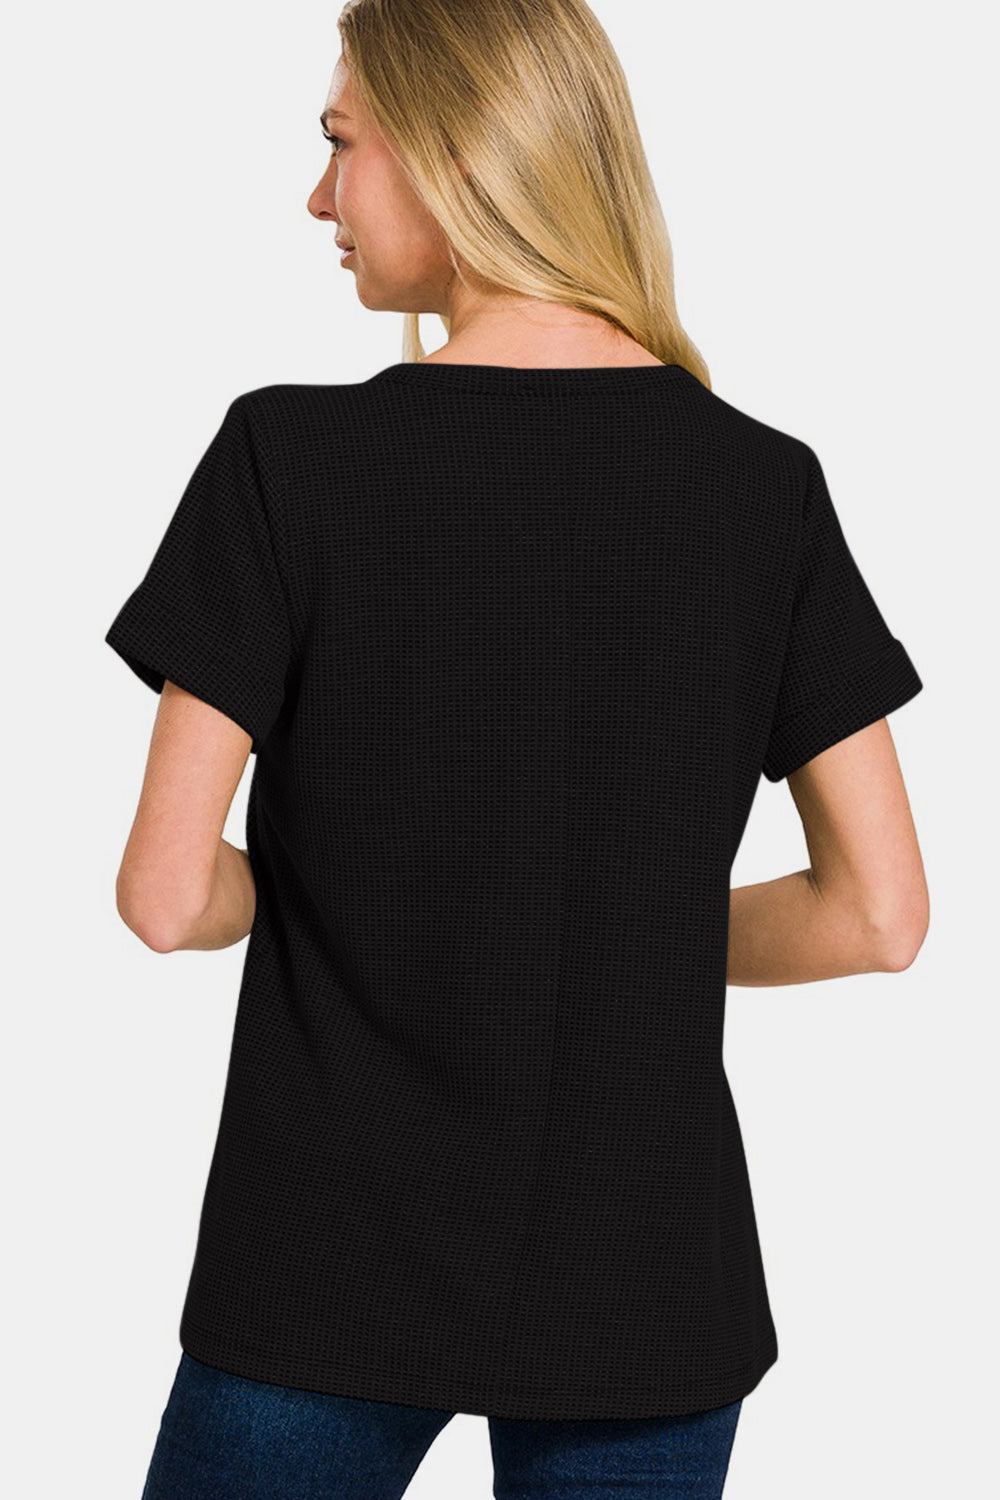 Zenana Notched Short Sleeve Waffle T-Shirt-Short Sleeve Tops-Inspired by Justeen-Women's Clothing Boutique in Chicago, Illinois